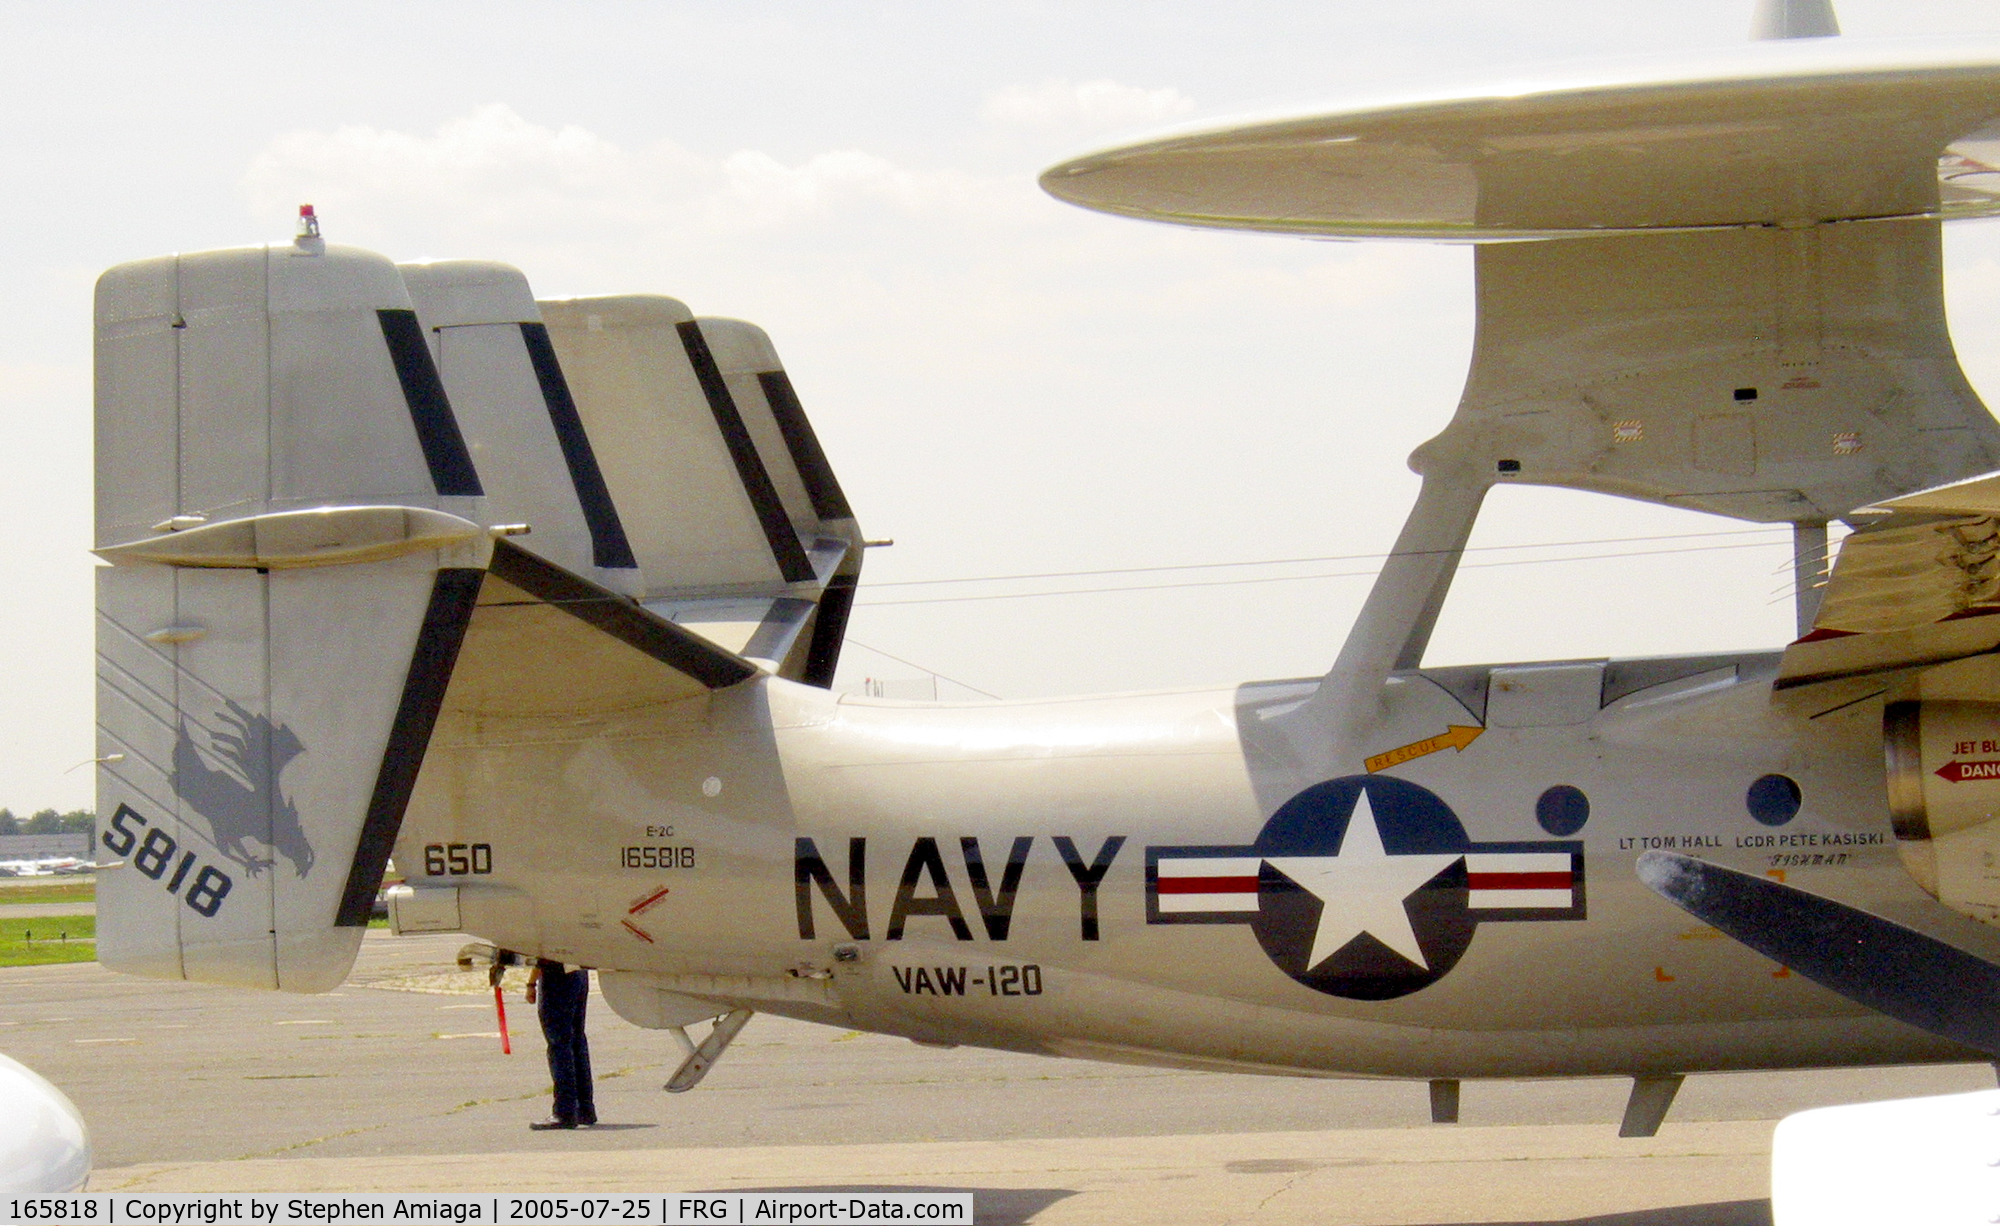 165818, 2000 Northrop Grumman E-2C Hawkeye C/N A189, Detail of the aft section of this awesome aircraft!